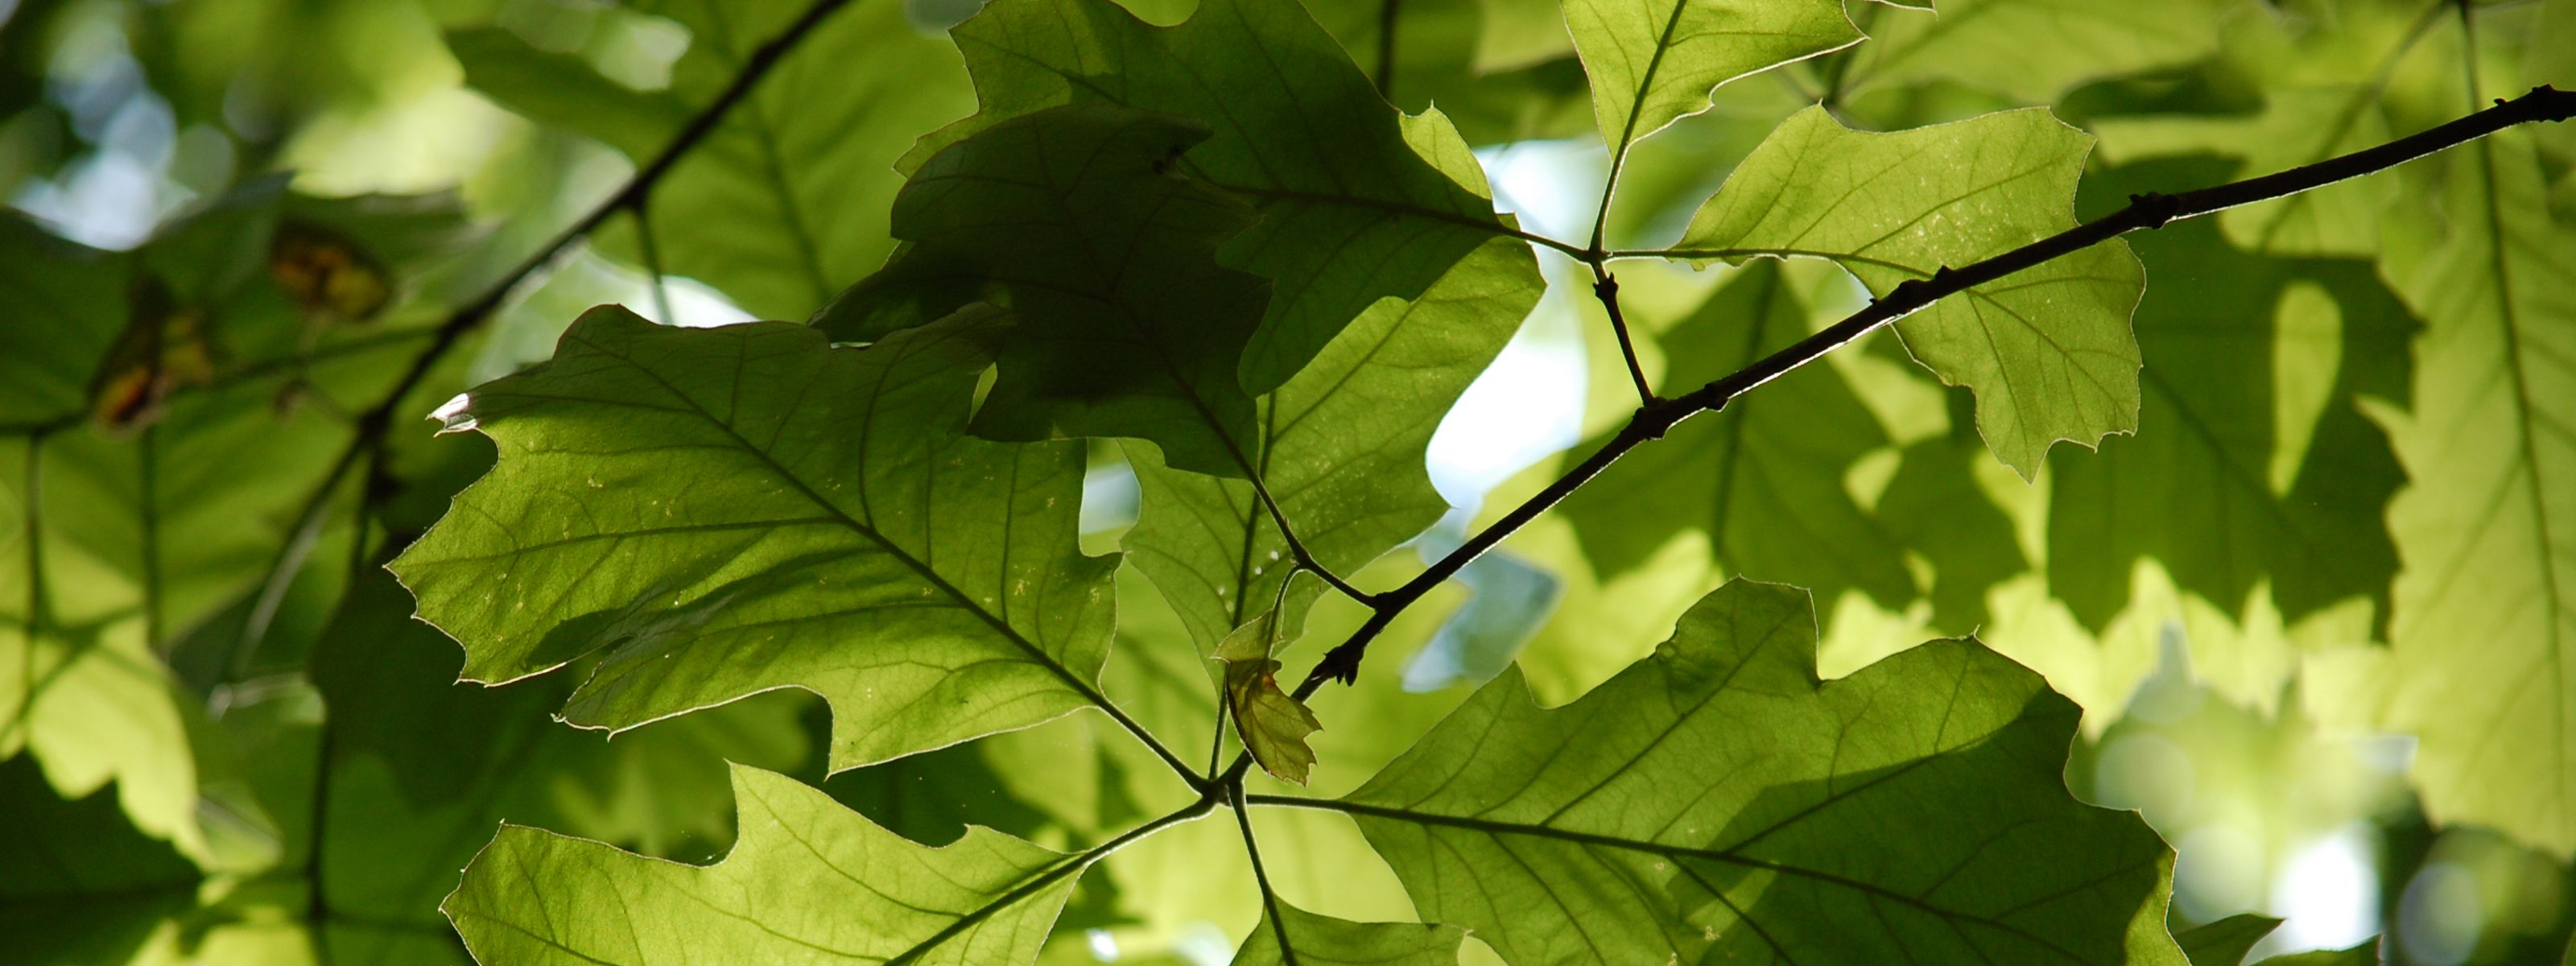 Sun shines through a cluster of large green oak leaves on a branch.